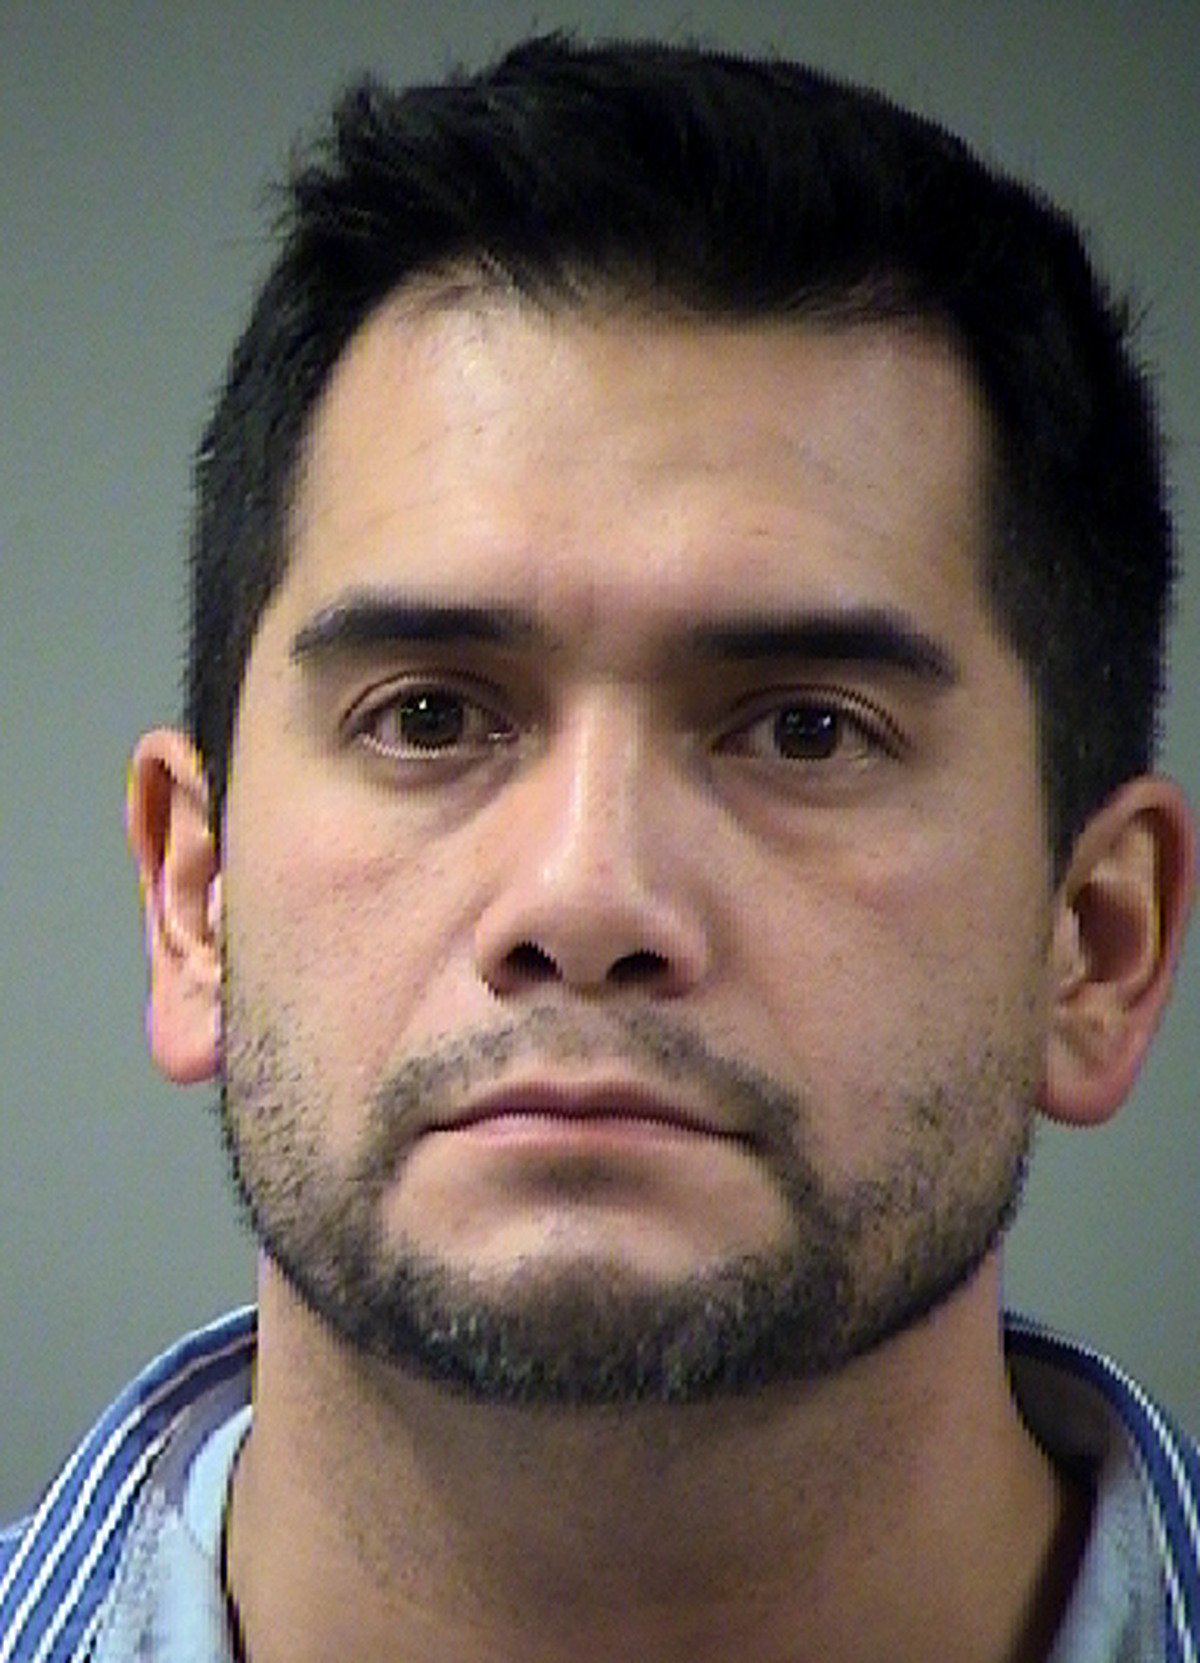 Joseph Anthony Becerra, 32, faces a Class B misdemeanor charge of theft.